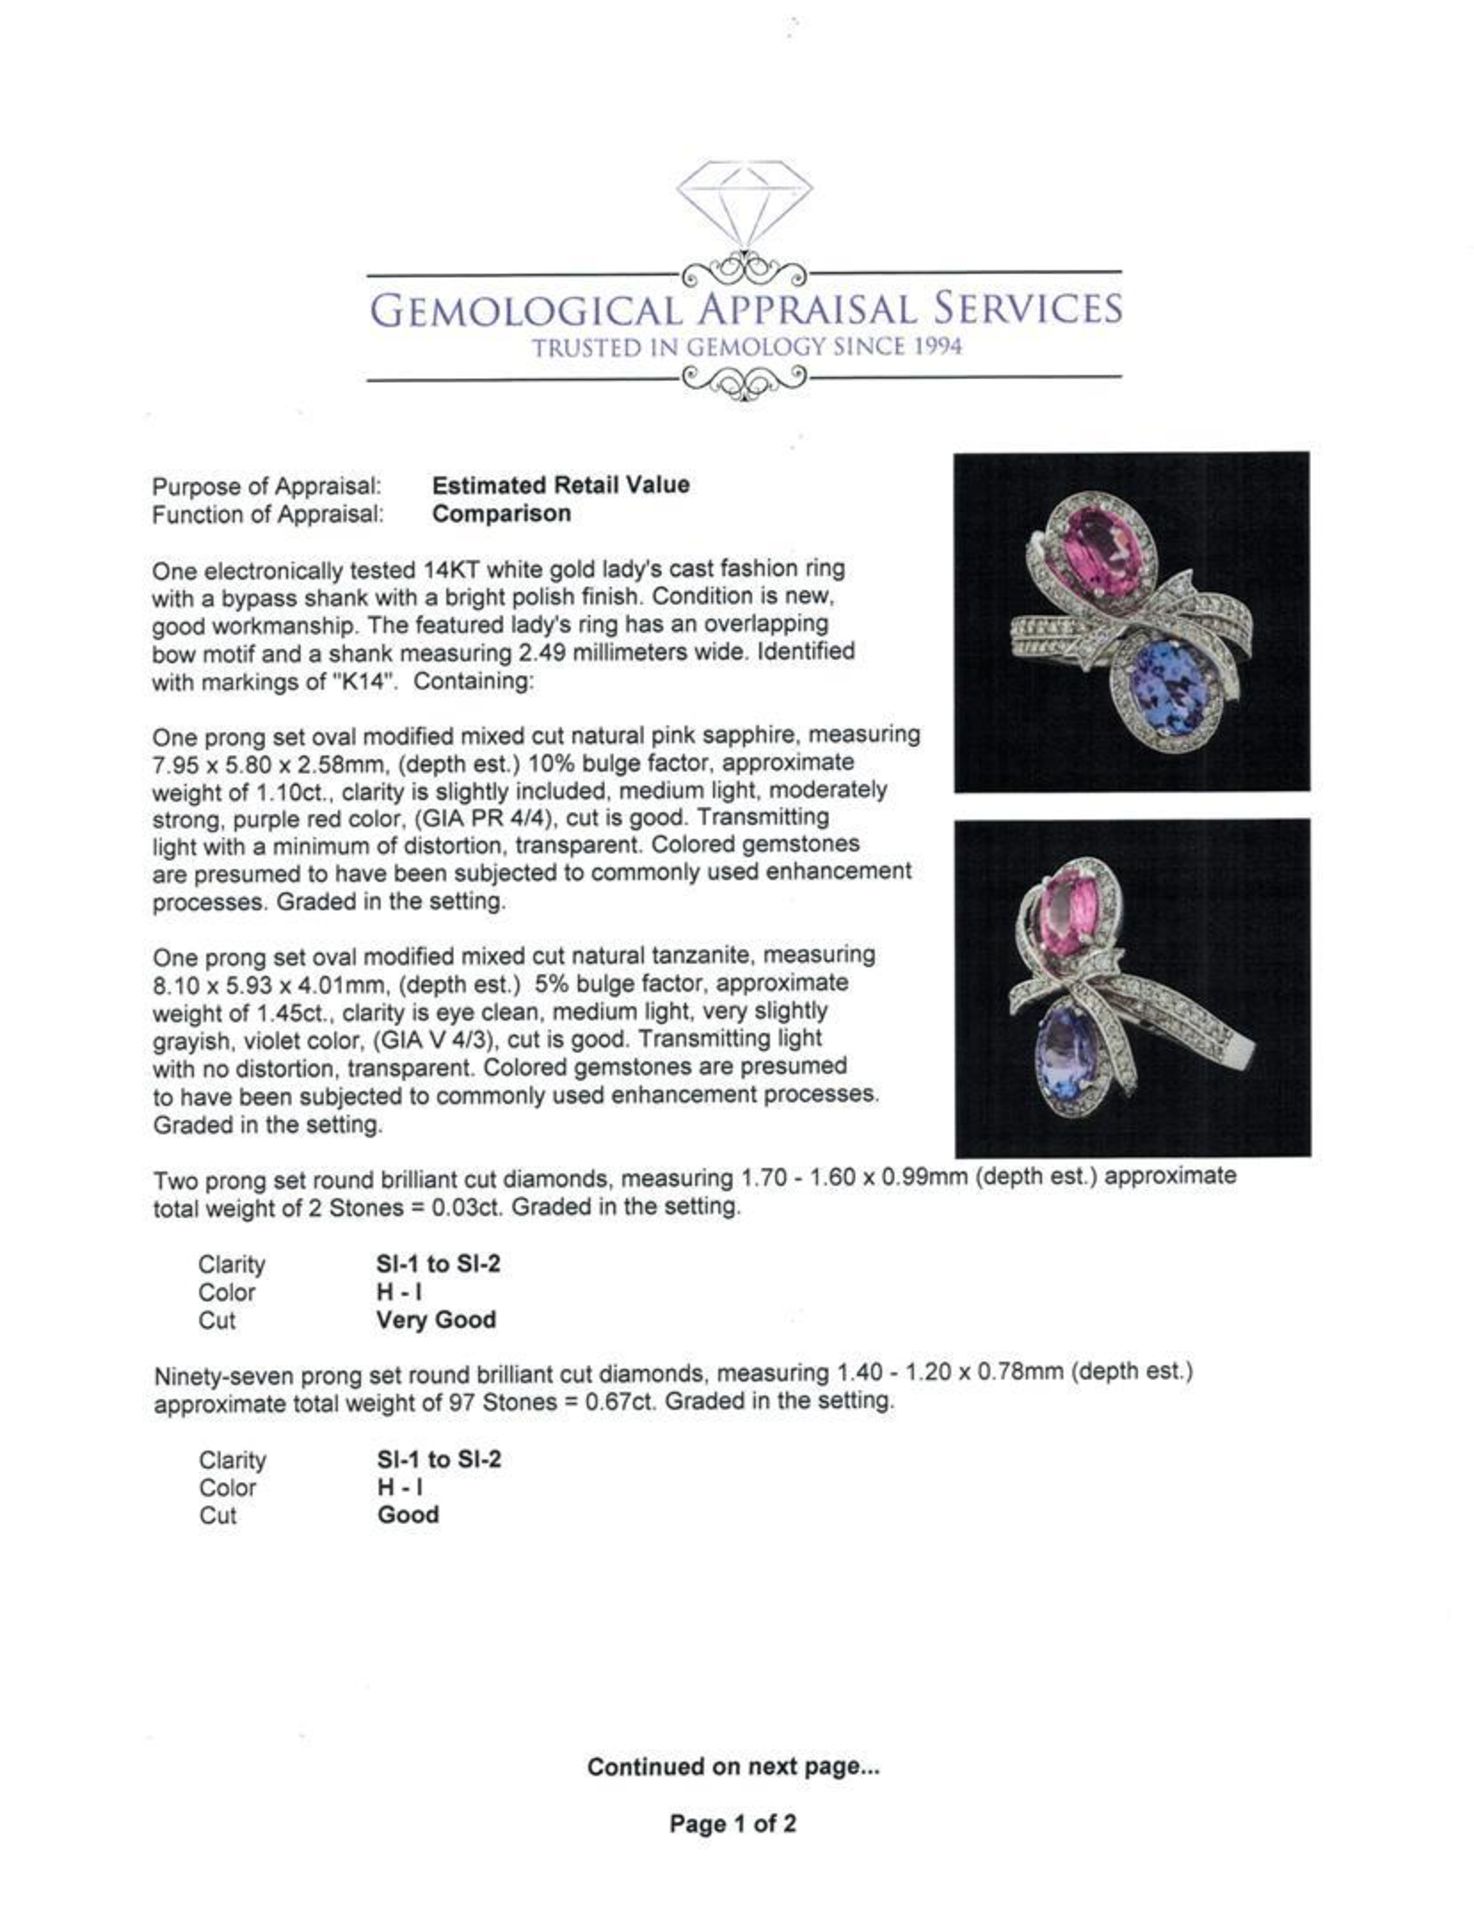 2.55 ctw Tanzanite, Pink Sapphire, and Diamond Ring - 14KT White Gold - Image 5 of 6